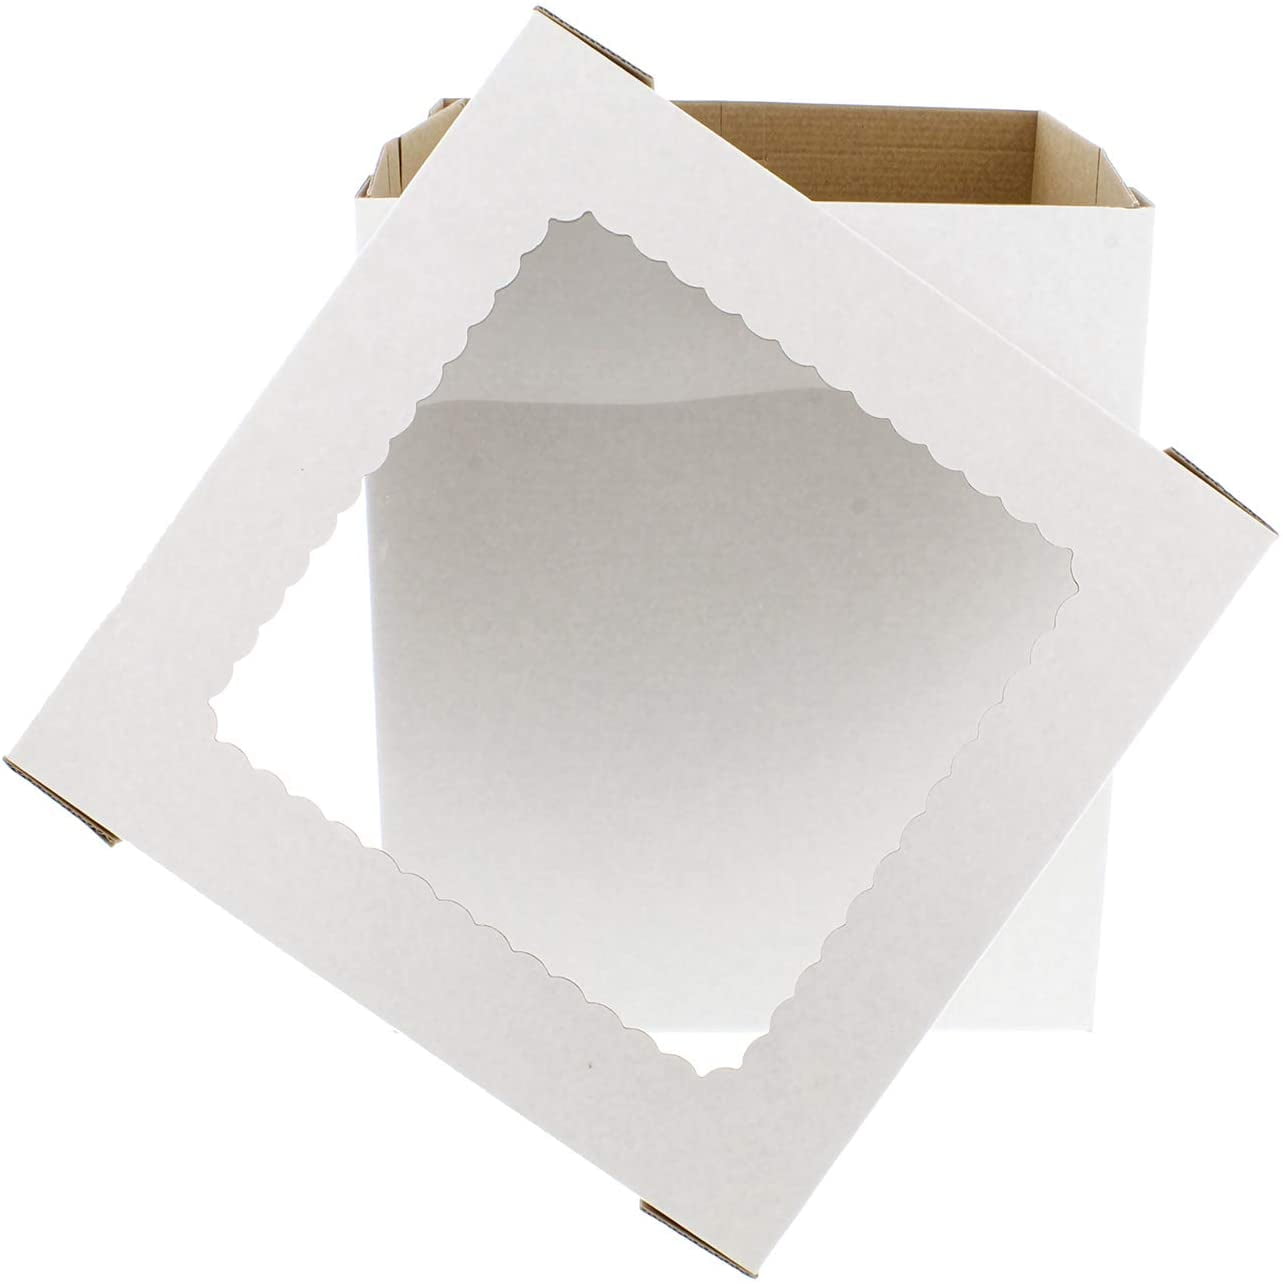 Special T Cake Boxes with Window 15pk 10 x 10 x 5in White Bakery Boxes Dessert Boxes Disposable Cake Containers 